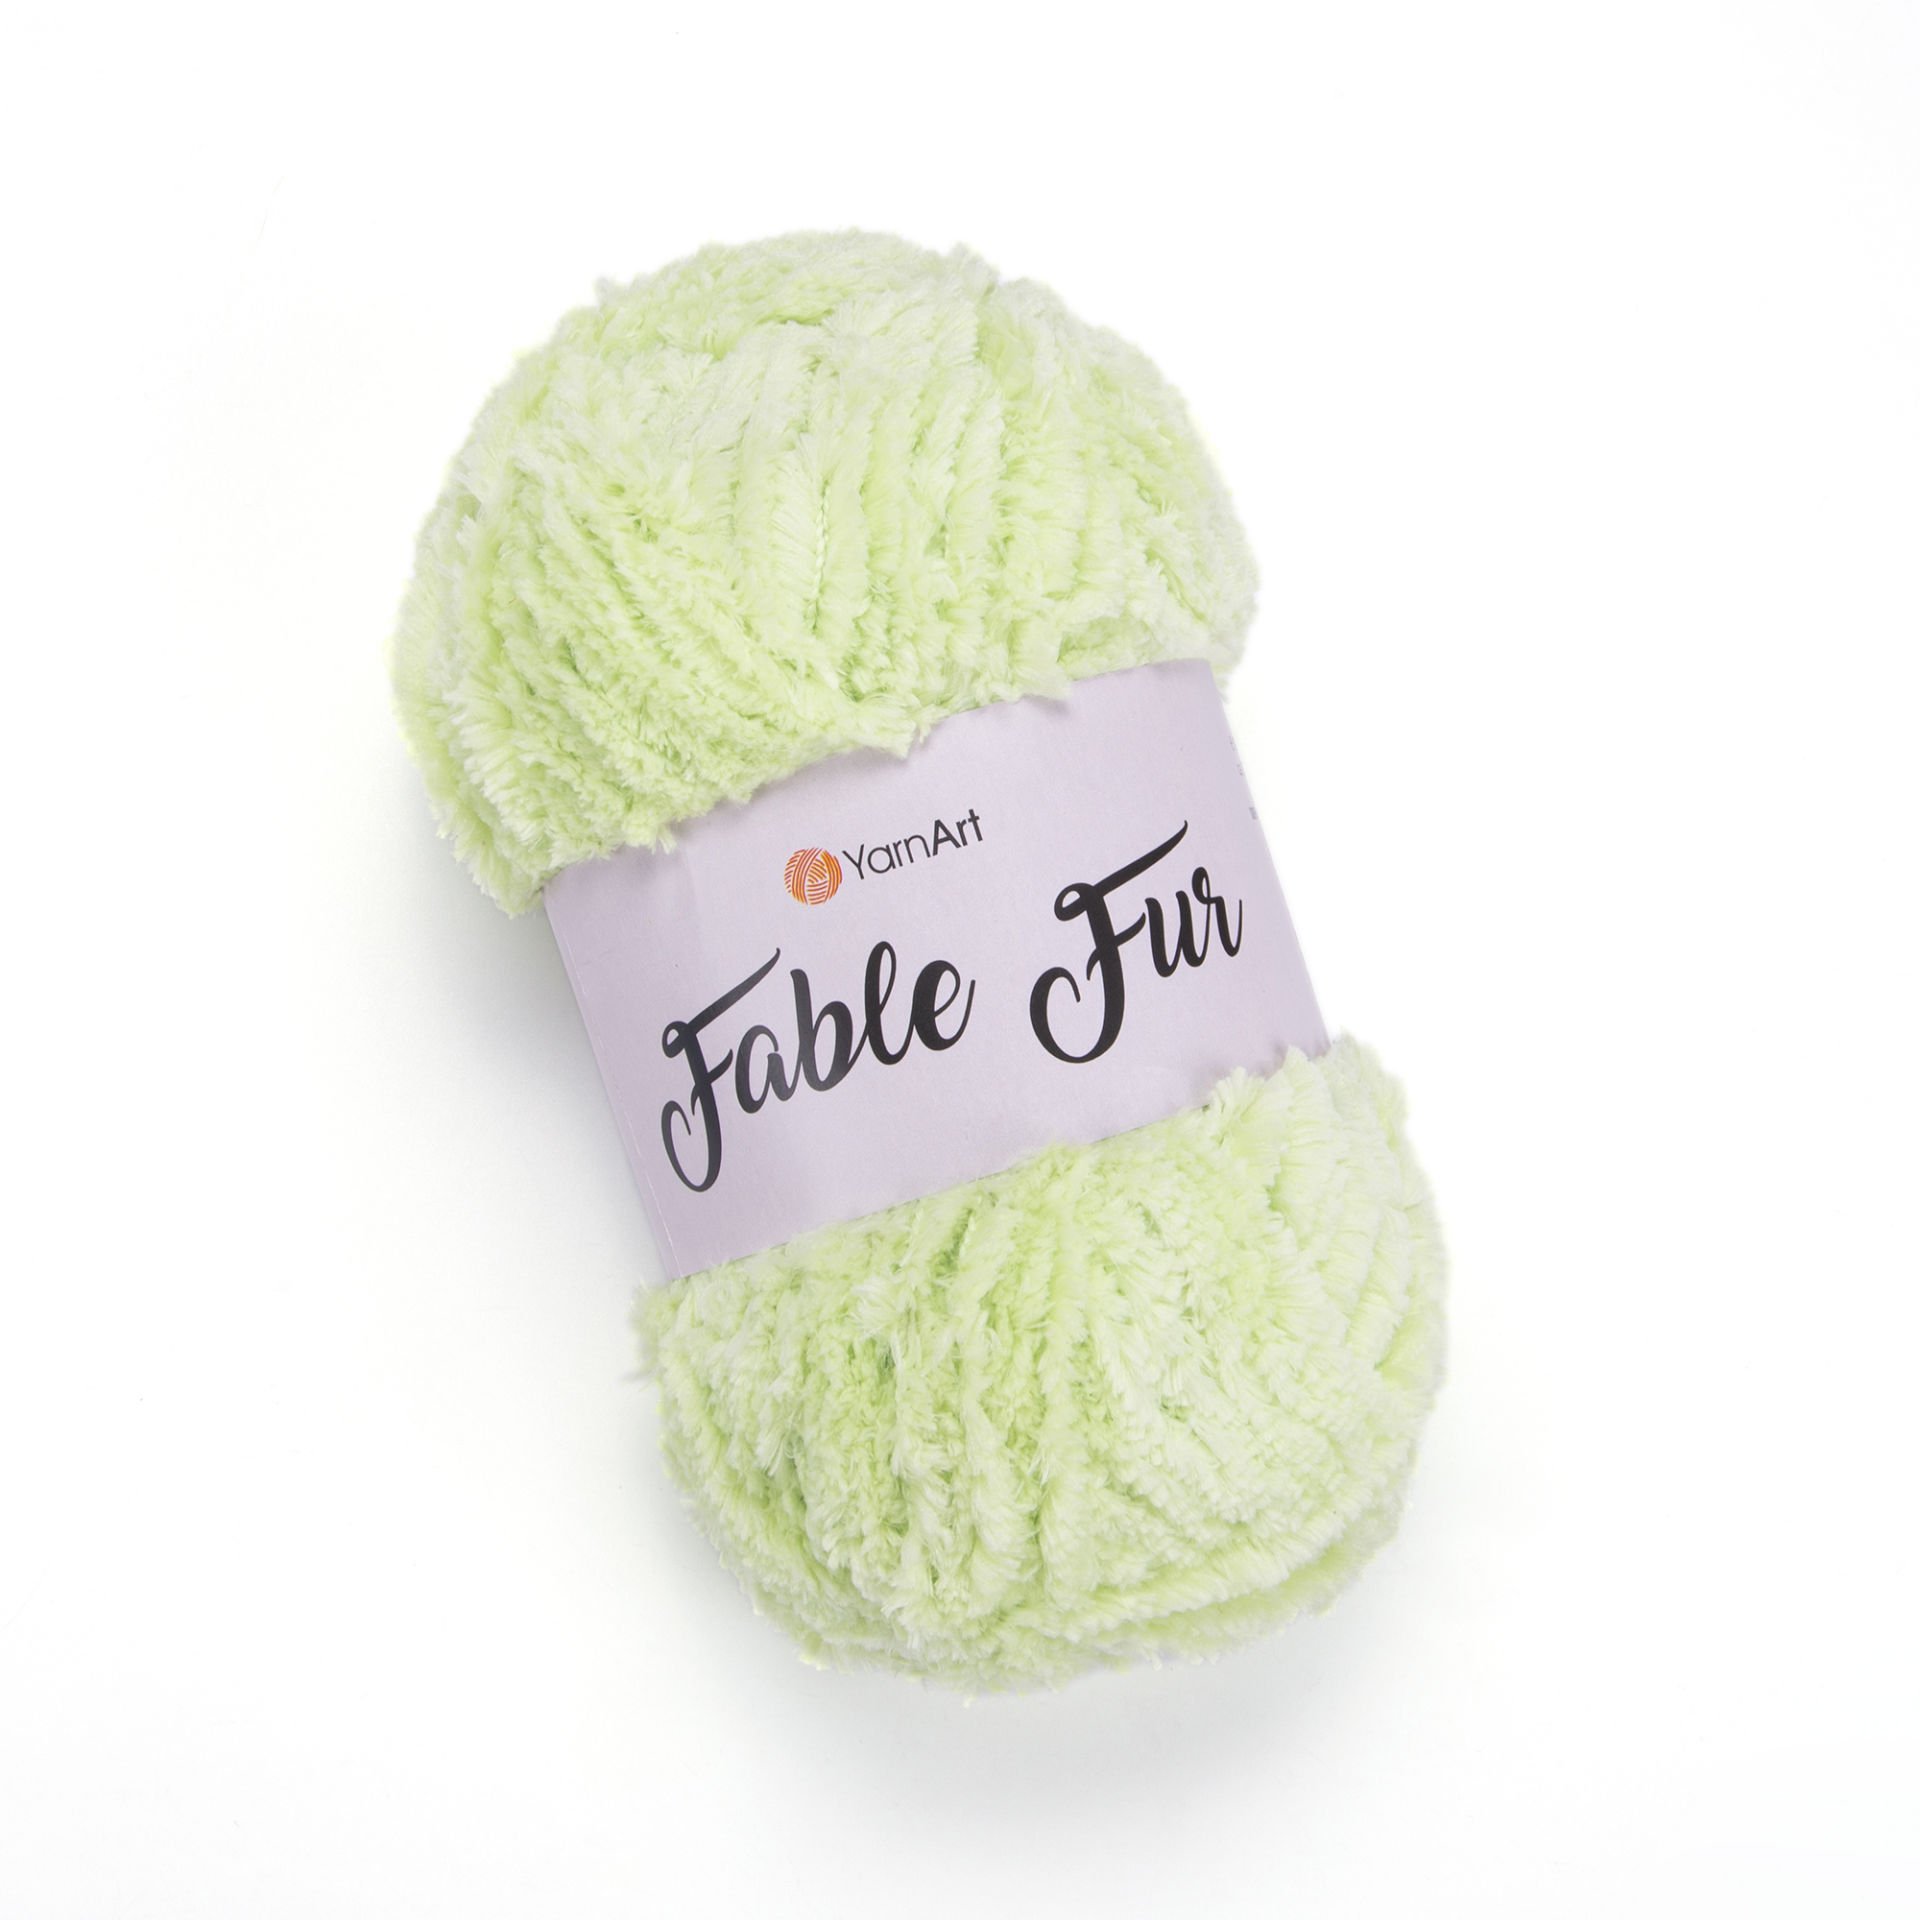 Fable Fur ~ A Yarn Review - Crystalized Designs